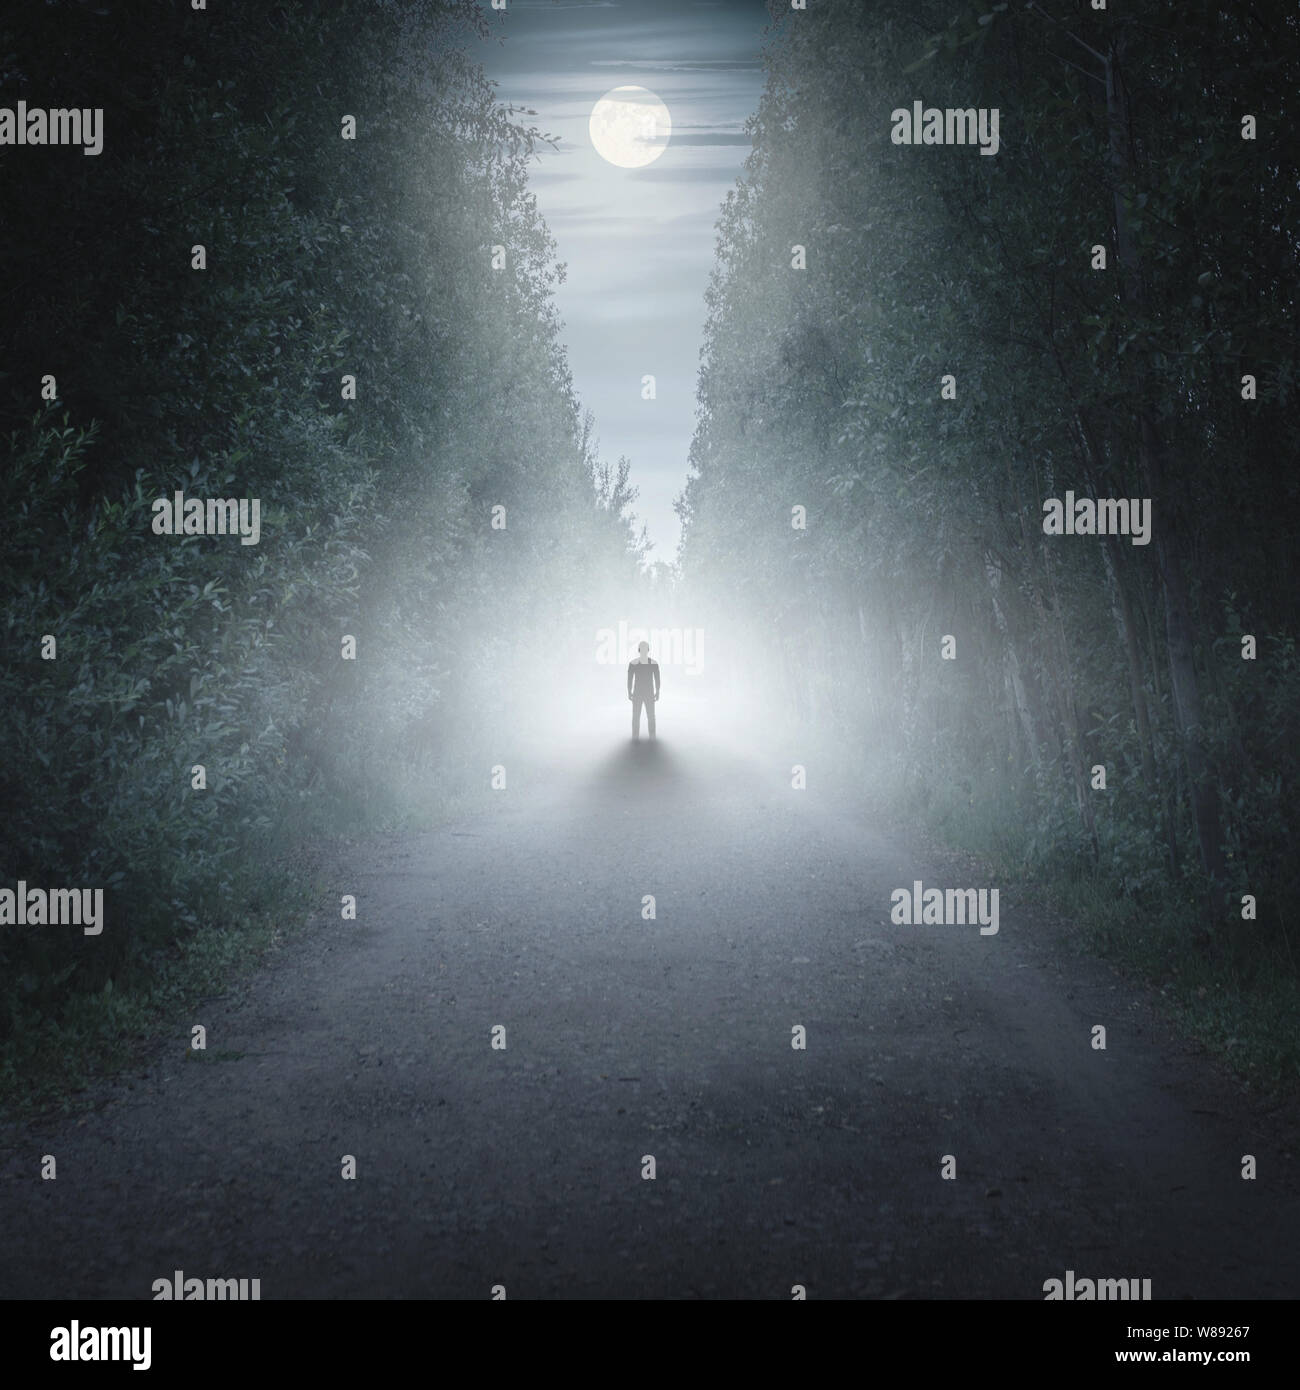 Silhouette of a man in a dark and foggy forest Stock Photo